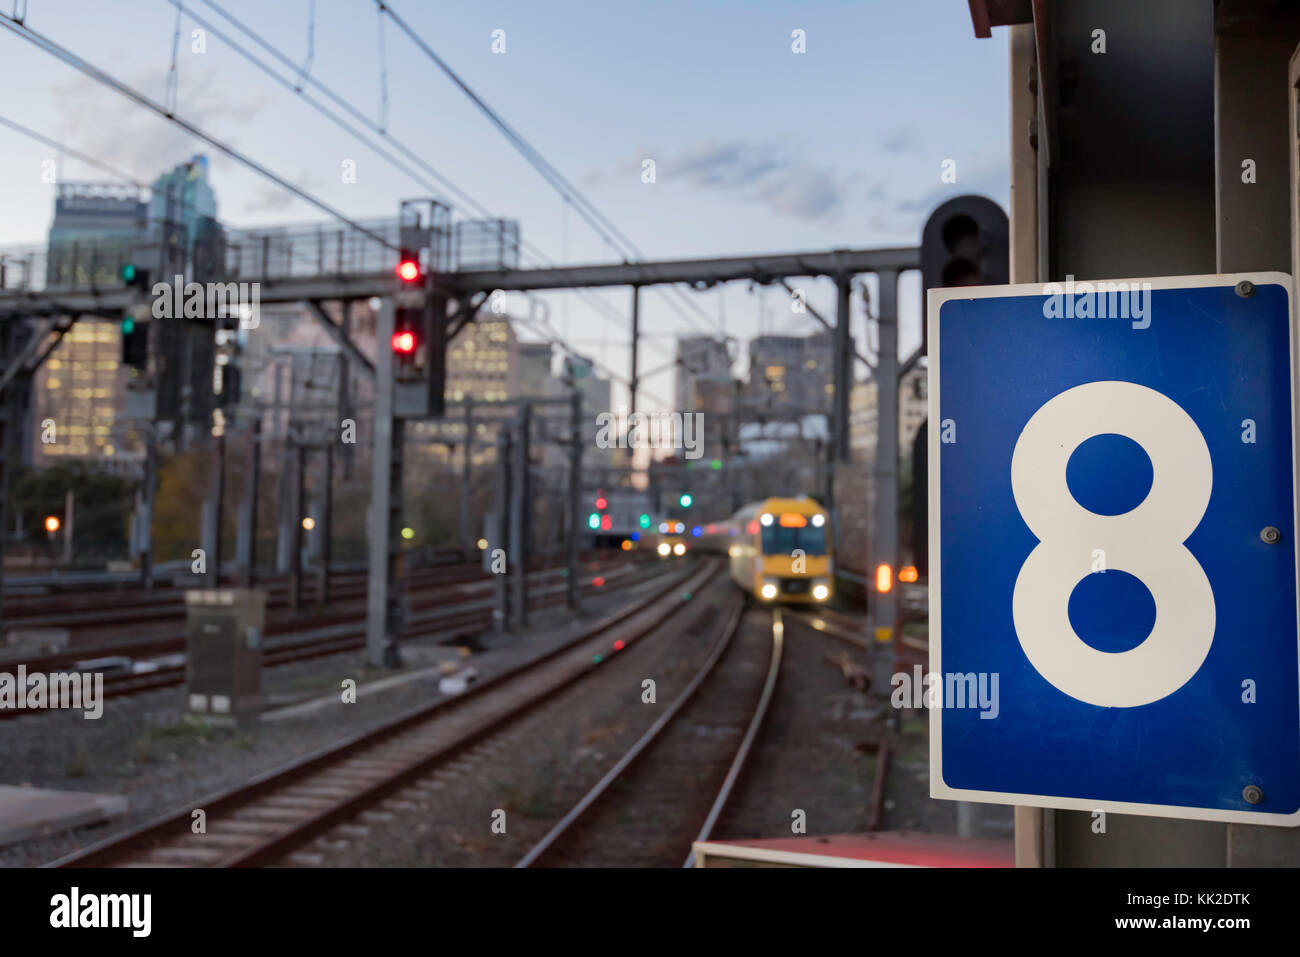 Prominent number 8 sign at a railway station with blurred train tracks, the city and a train approaching in the background at Central Station, Sydney Stock Photo